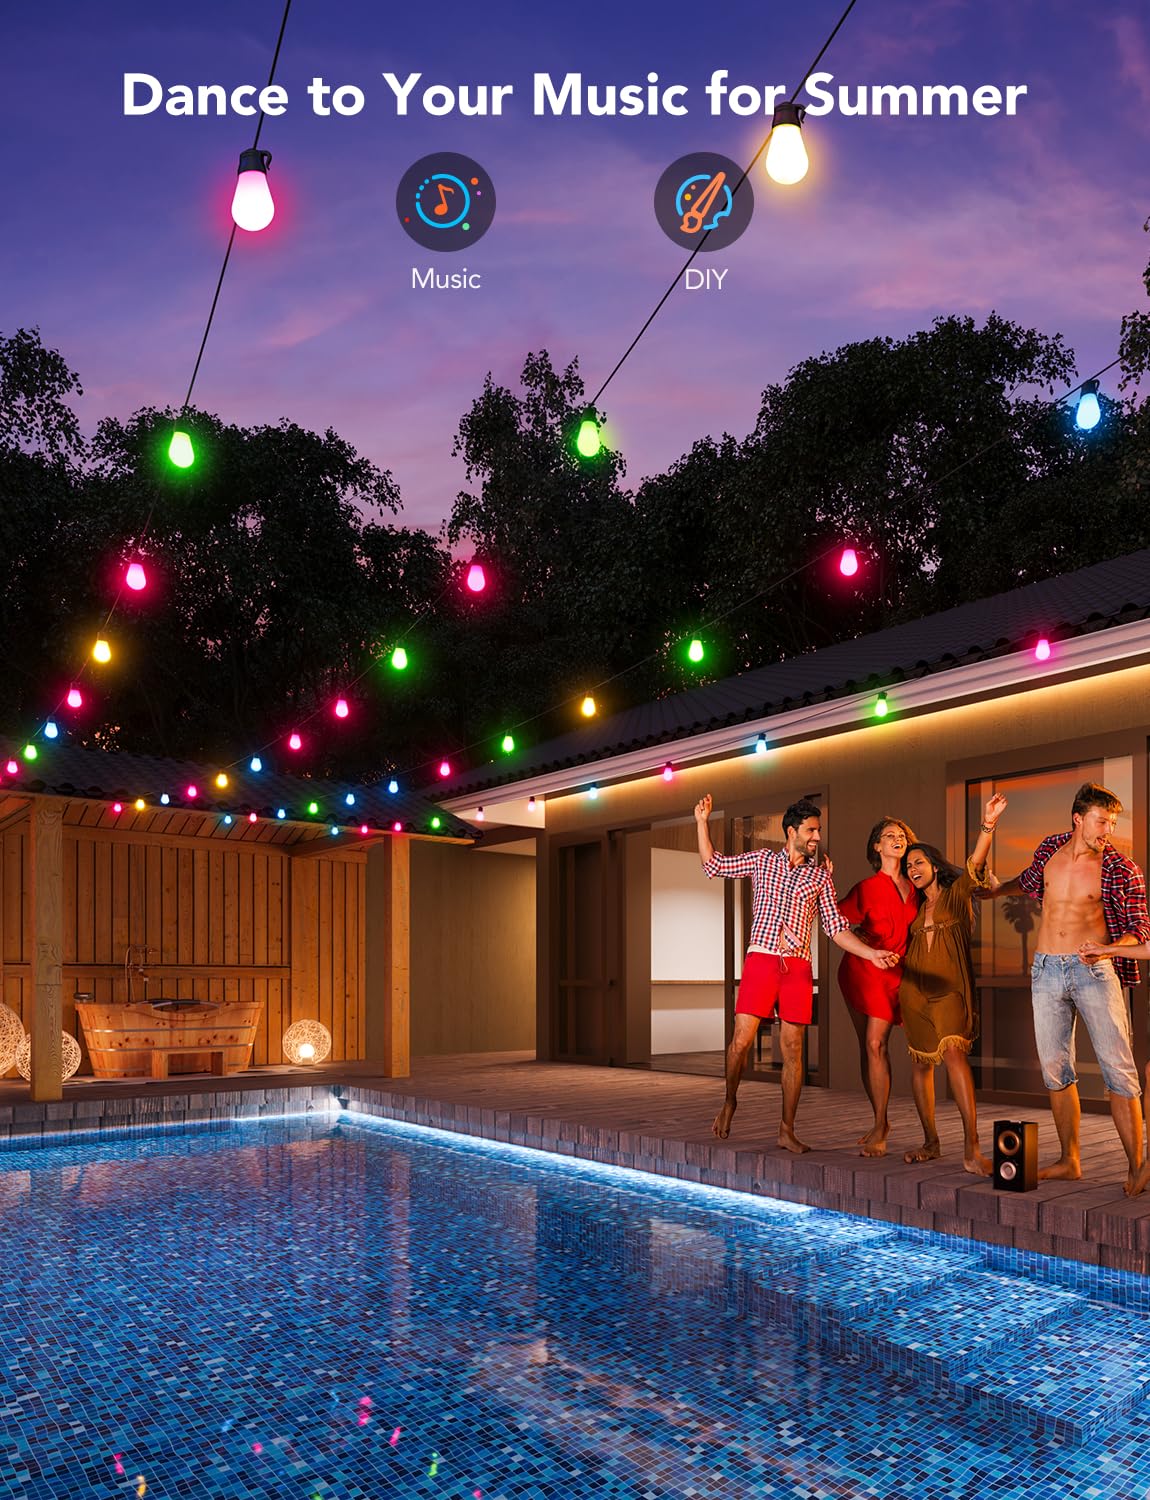 Govee Smart Outdoor String Lights with 8 Dimmable RGBIC LED Bulbs, 24ft IP65 Waterproof Shatterproof Patio Lights, Color Changing Warm White Lights with 47 Scene Modes for Balcony, Backyard, Party